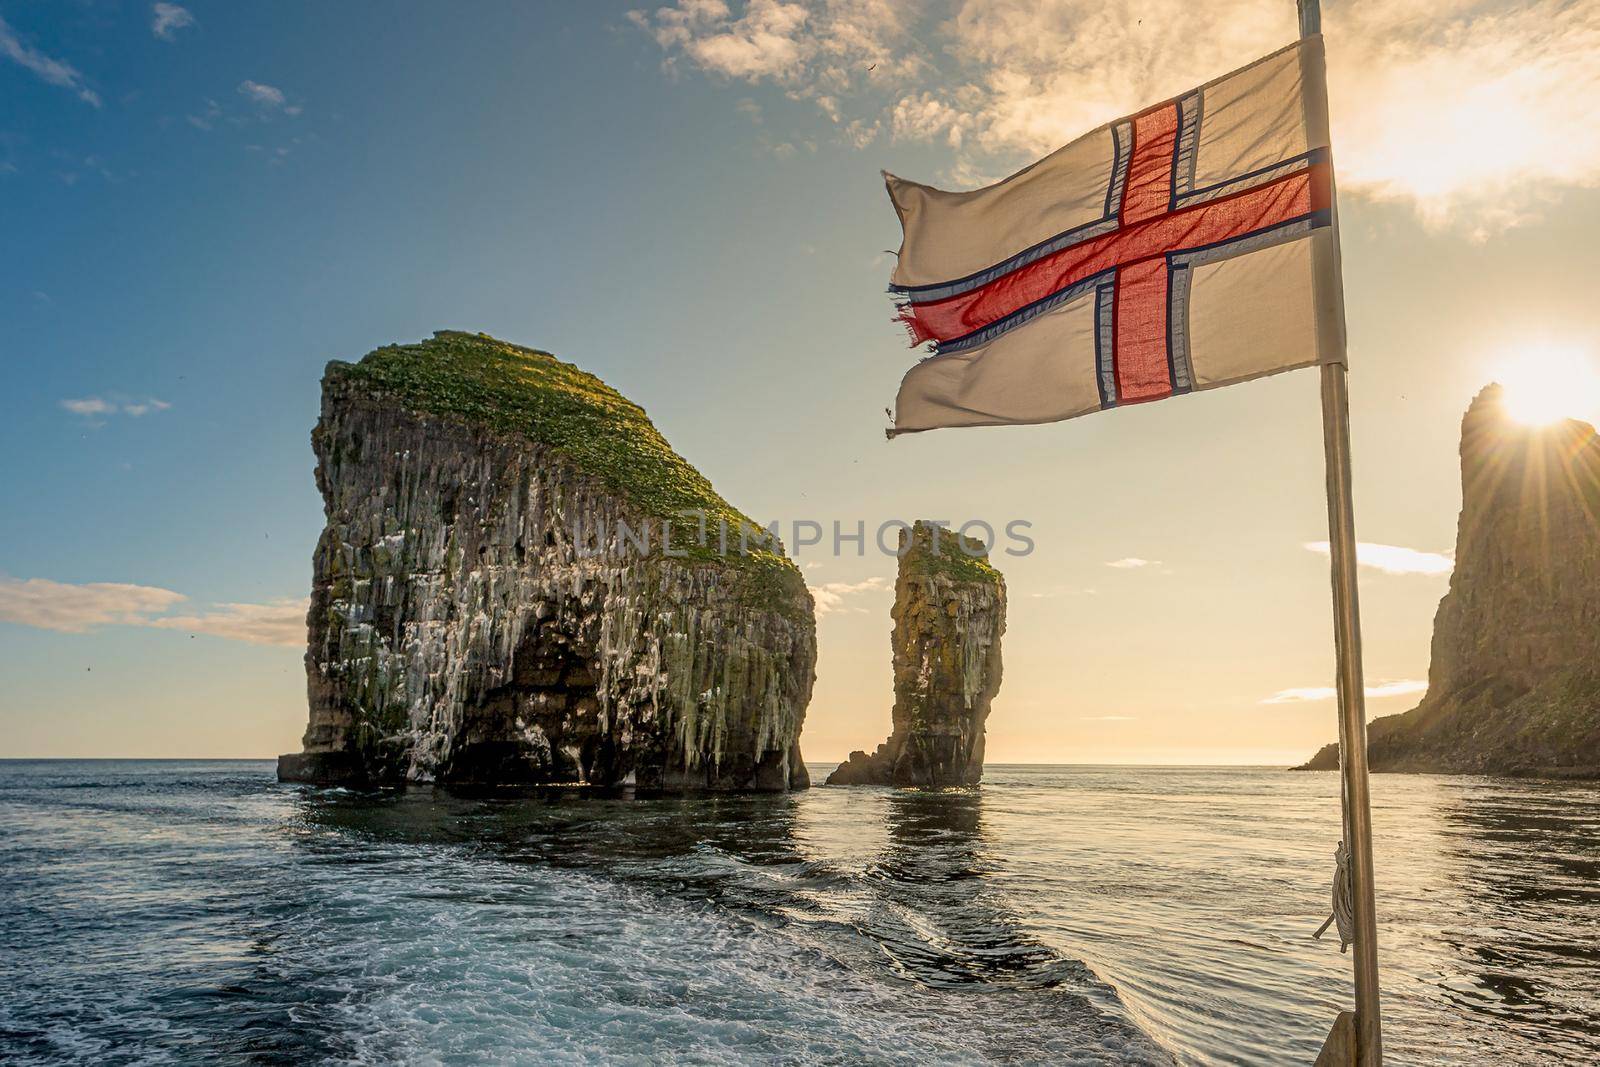 Sailing at mythical Faroe Islands full of seabirds during wonderful sunset and under Faroe Islands national flag by neurobite